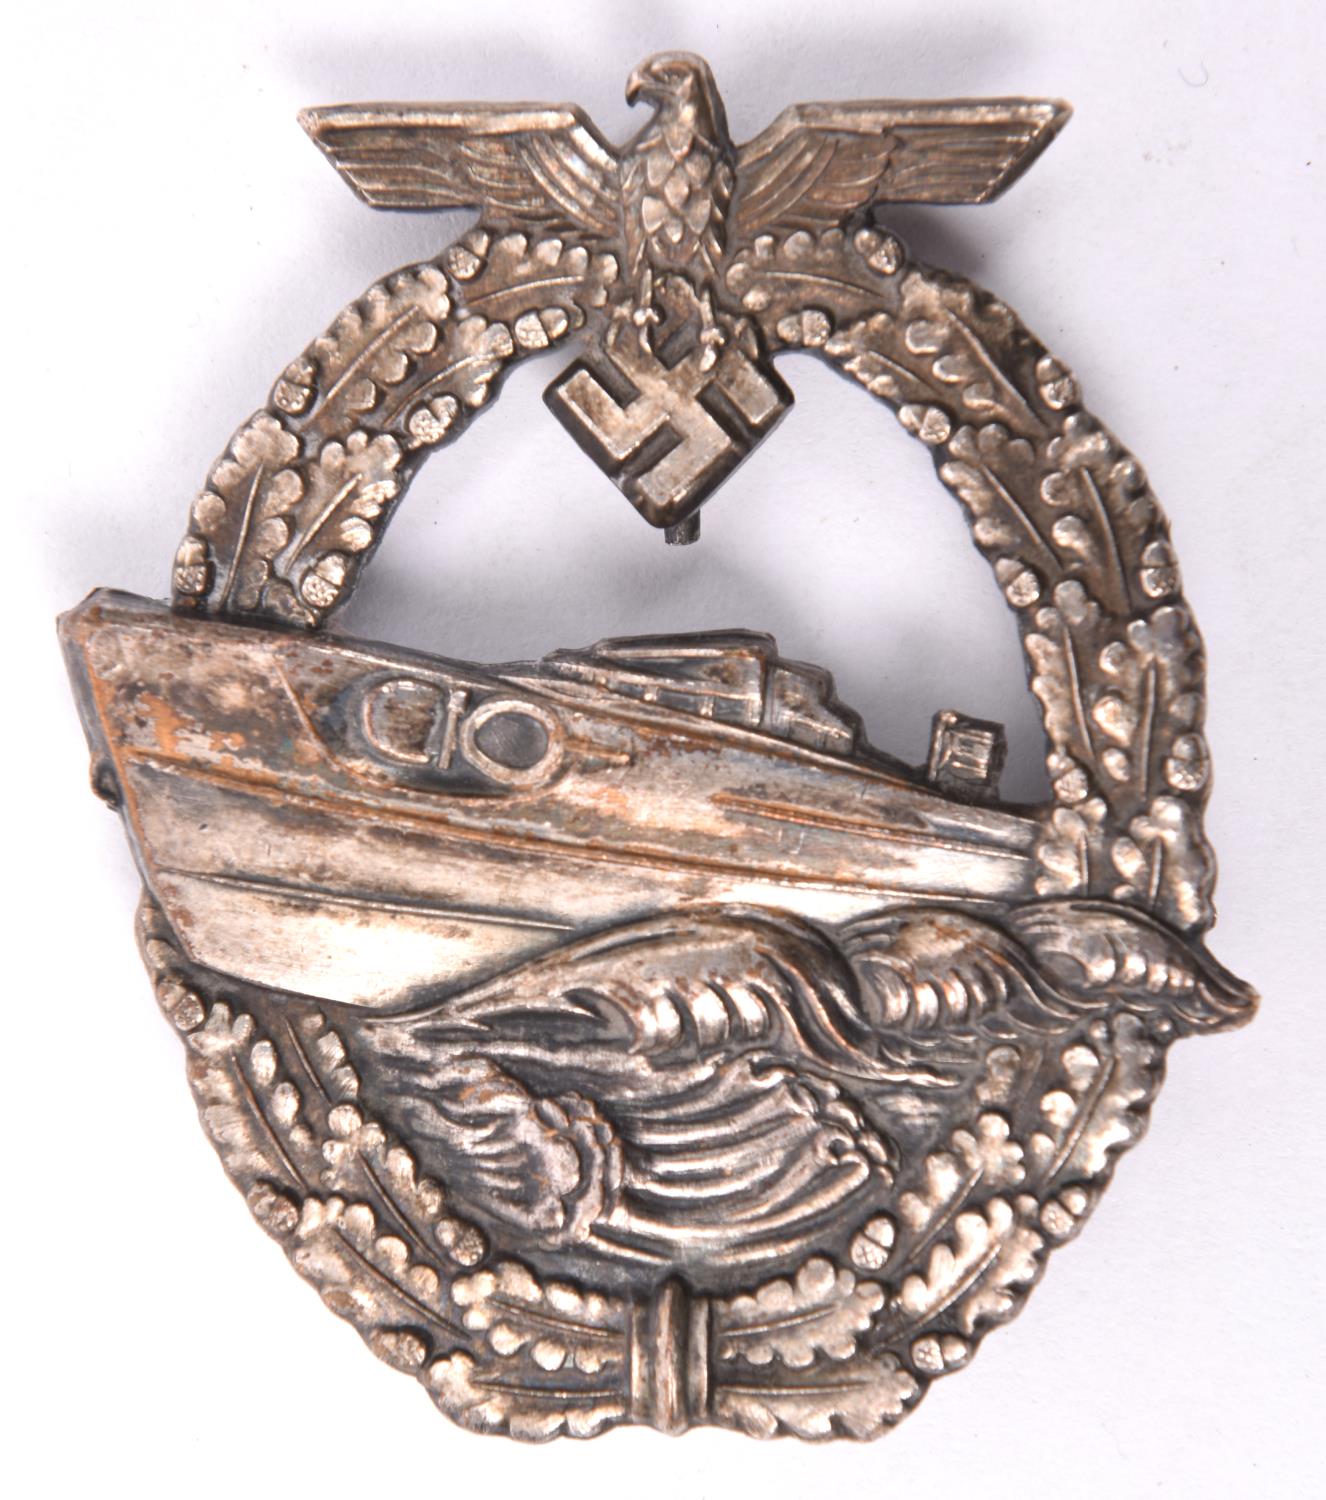 A Third Reich 2nd pattern E boat badge, by Schwerin, the swastika not fretted. GC